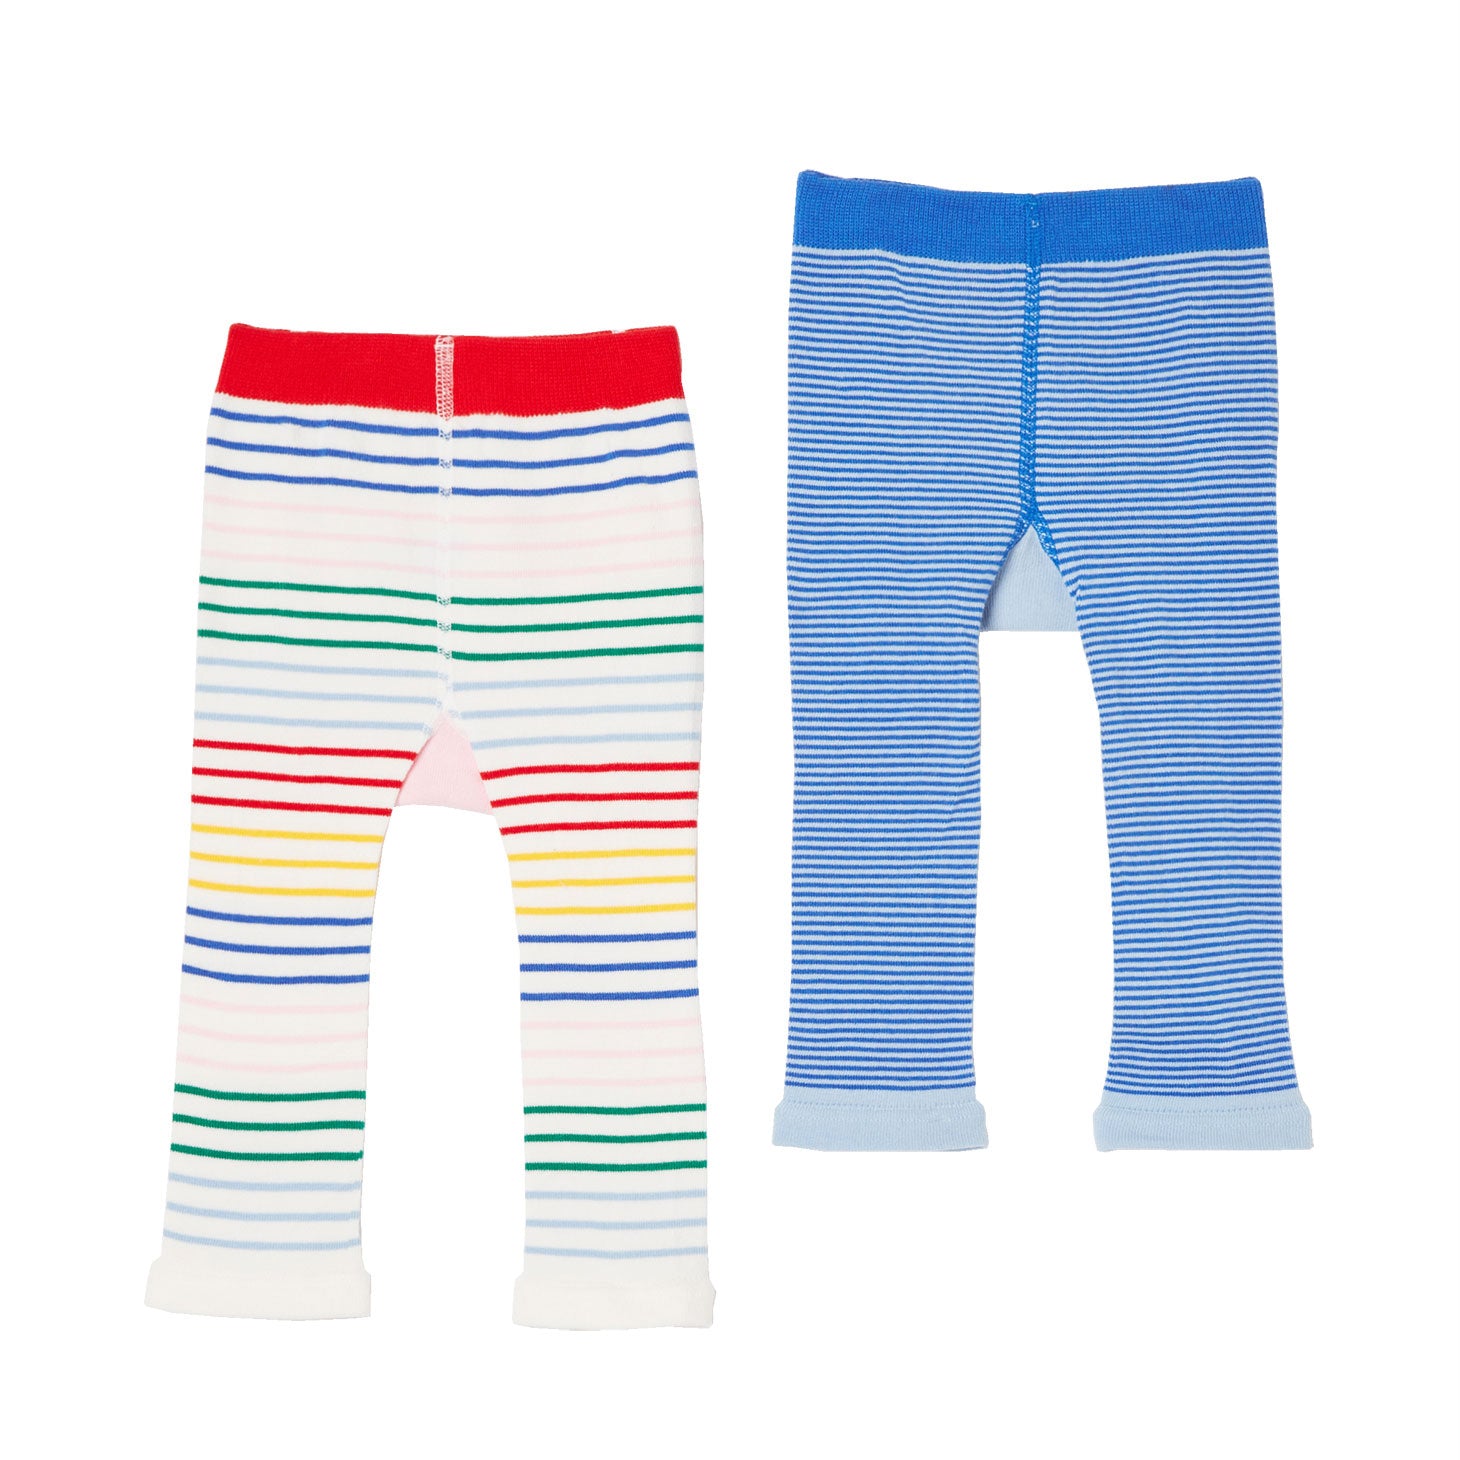 The Official Website of Joules Baby Lively 2 Pack Character Leggings Online